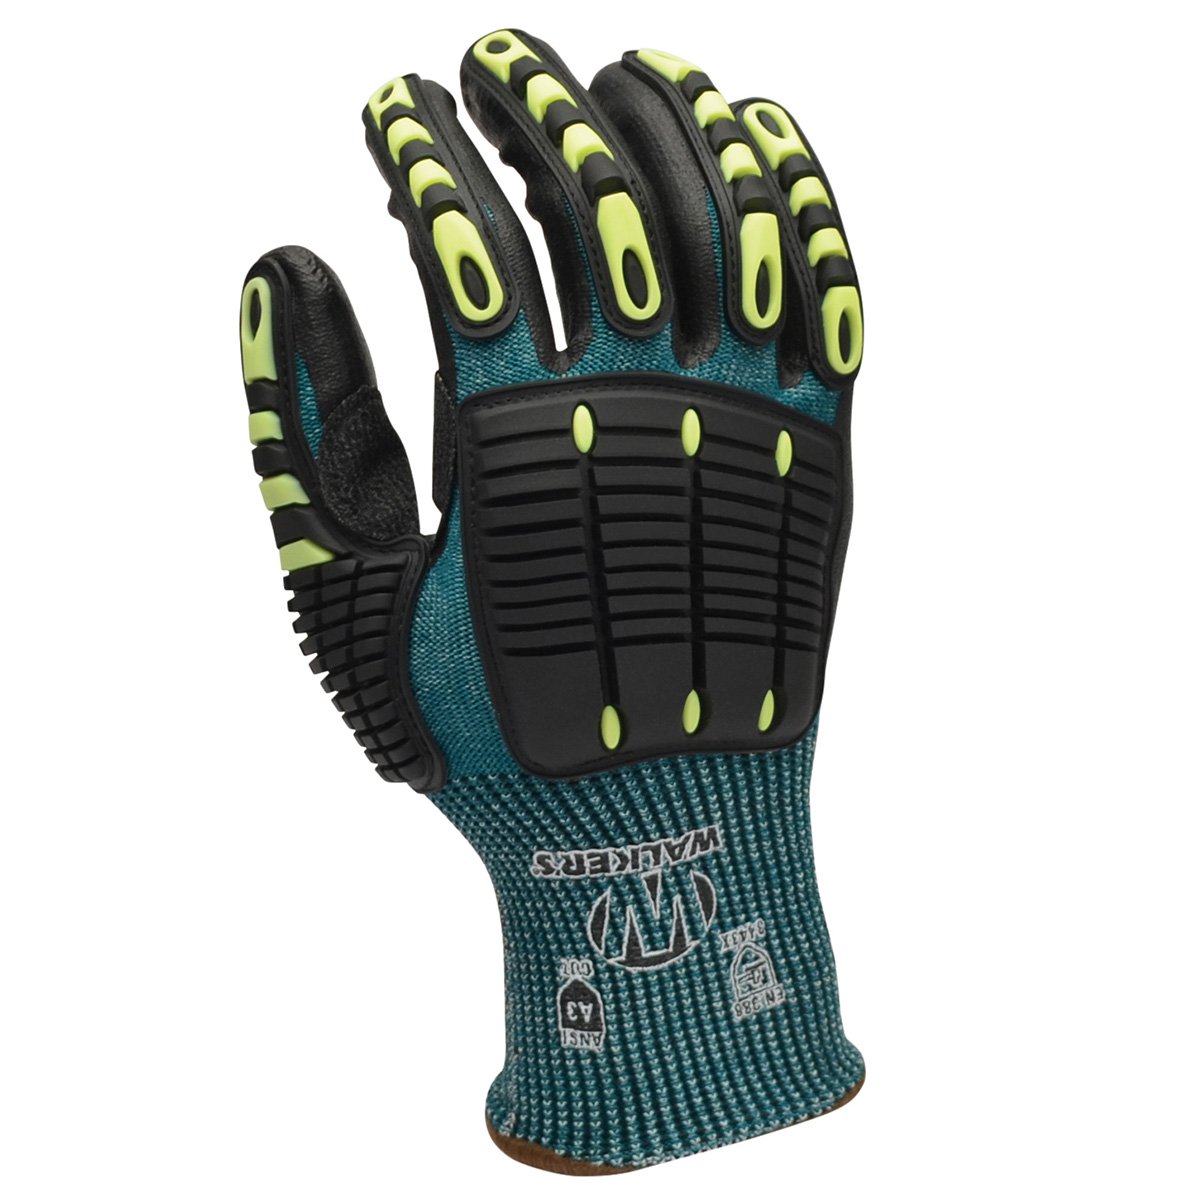 https://www.walkersgameear.com/wp-content/uploads/sites/4/2021/06/walkers-impact-and-cut-resistant-gloves.jpg